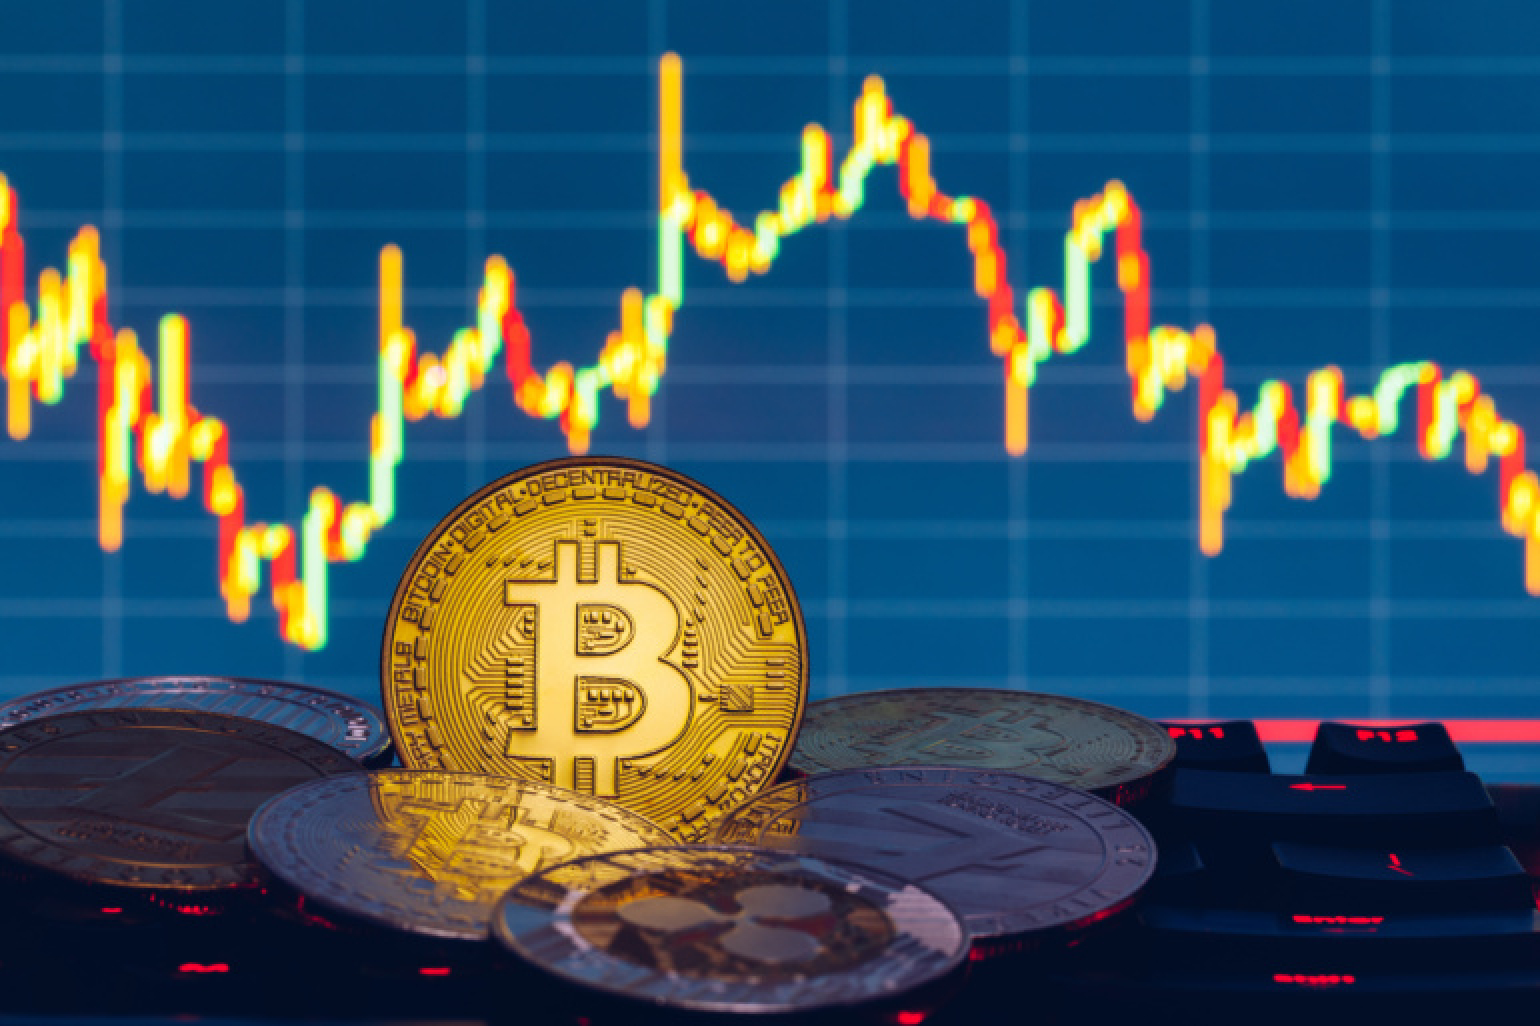 Bitcoin updated its historical maximum - the price for the coin reached $69.2 thousand.